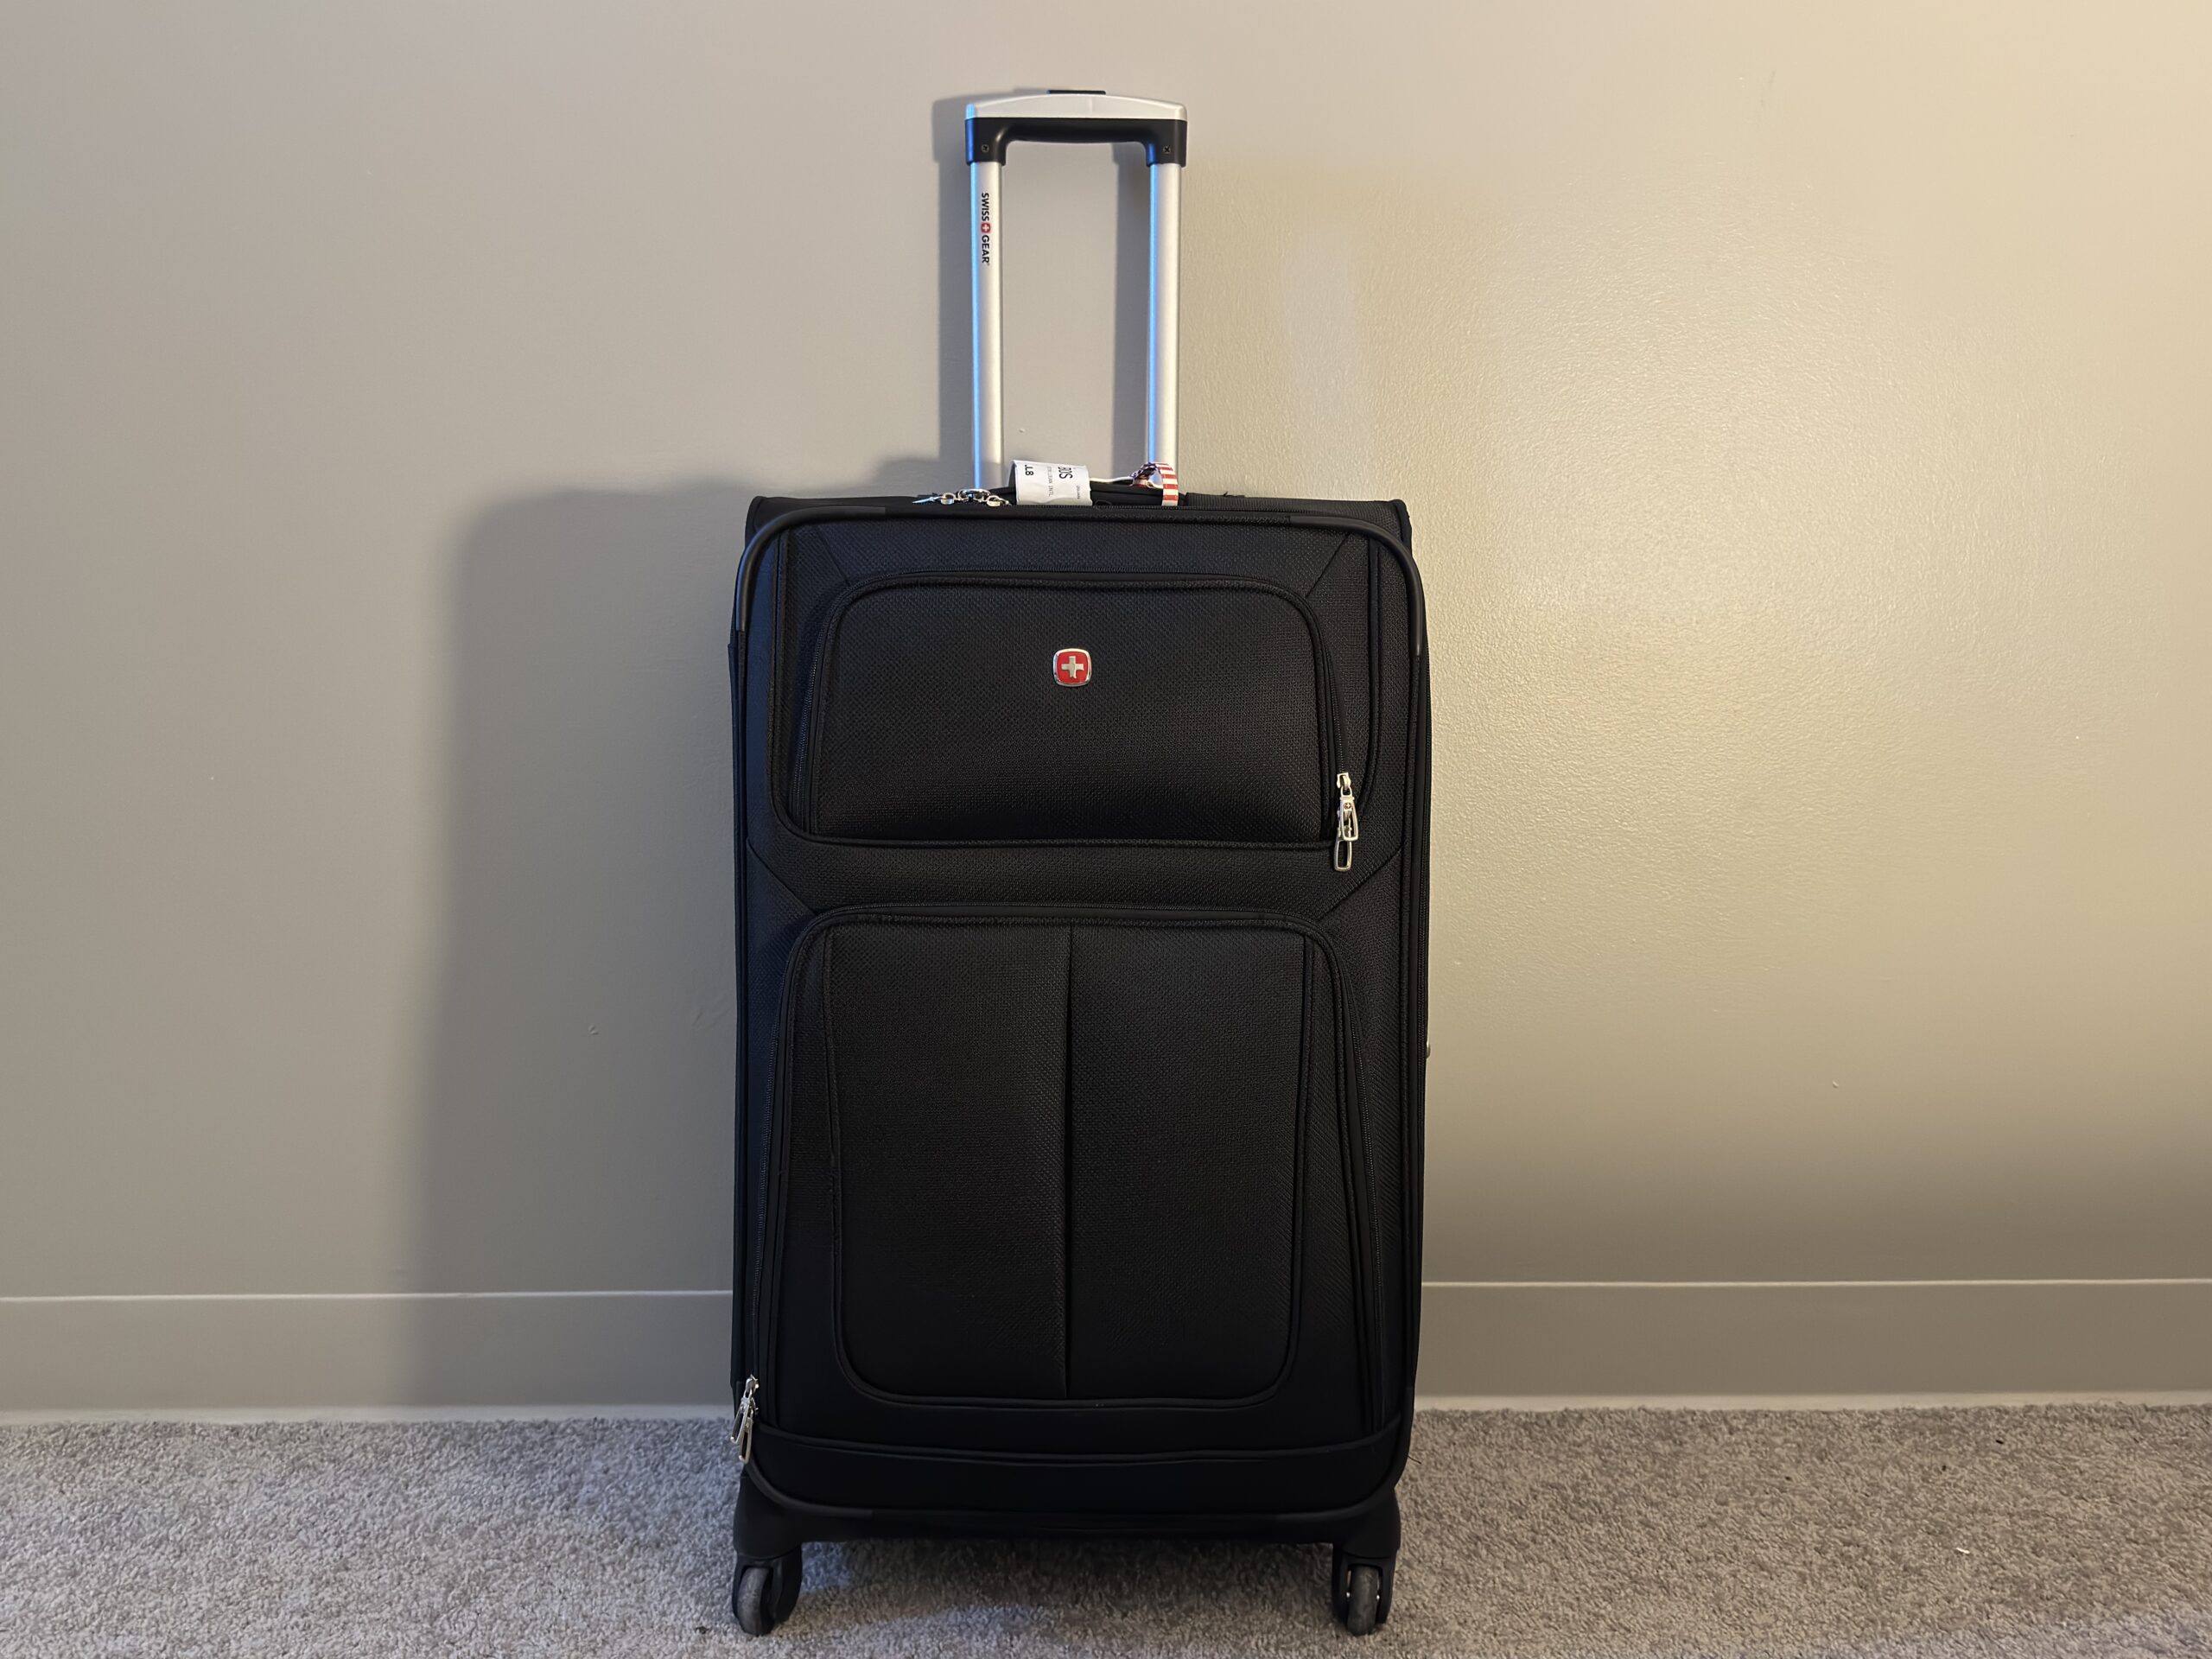 The best budget suitcase in the market right now